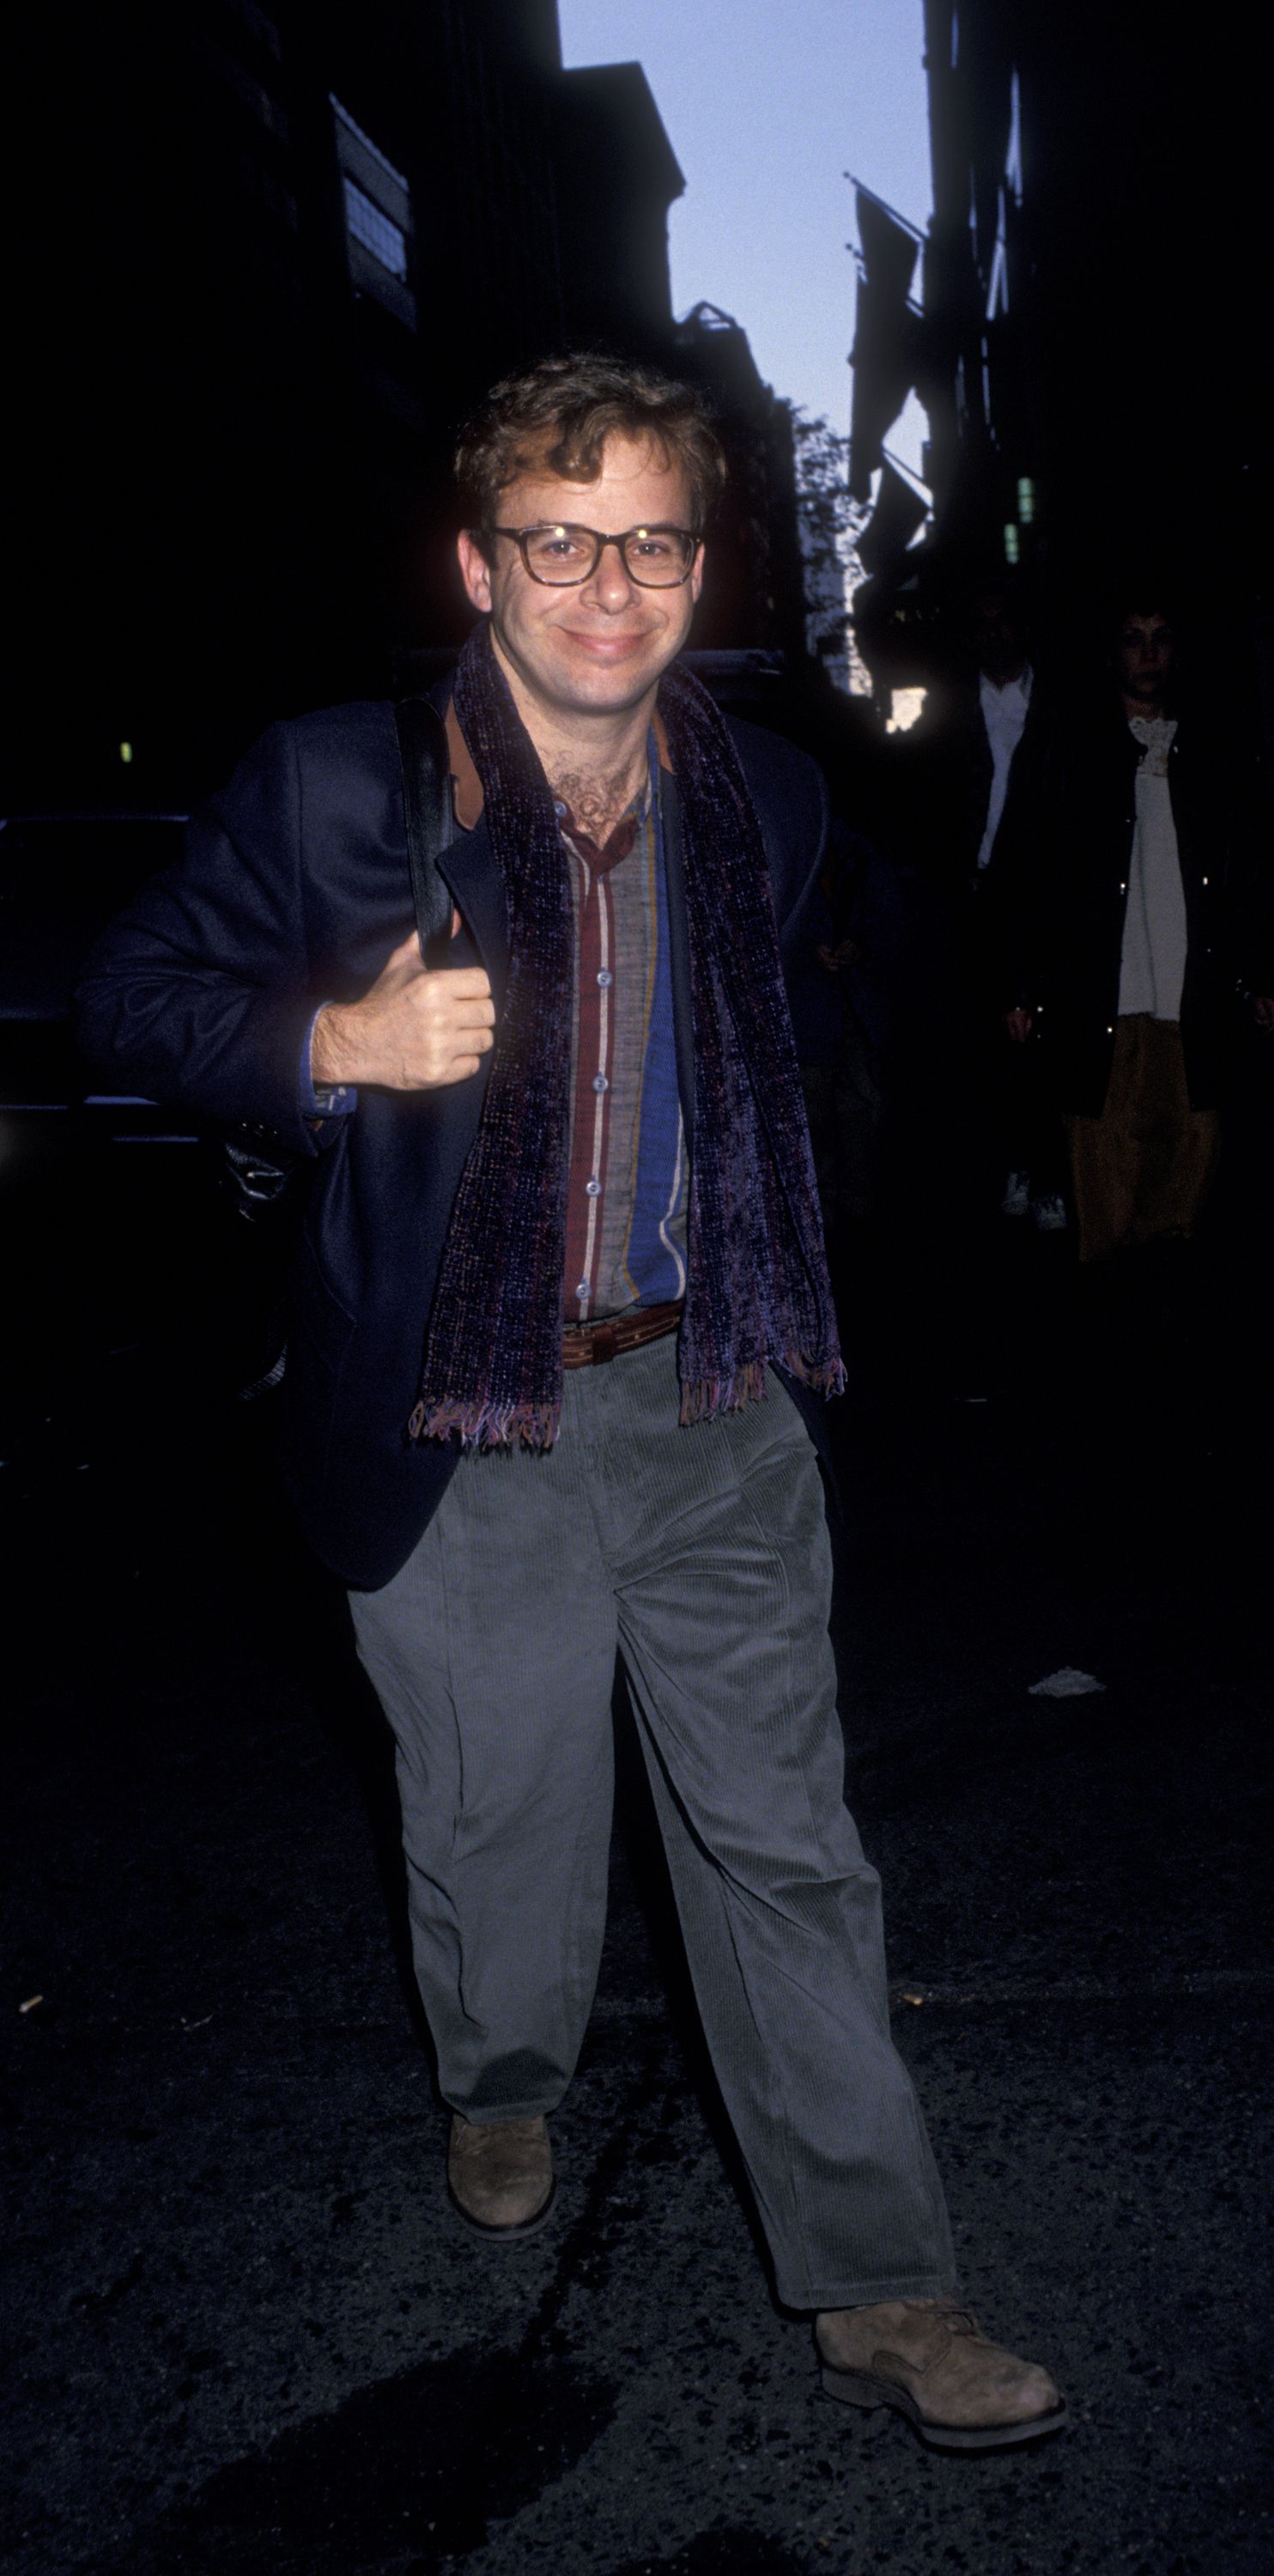 Comedy actor Rick Moranis arrives at the premiere of The Nutcracker on November 21, 1993. | Photo: Getty Images